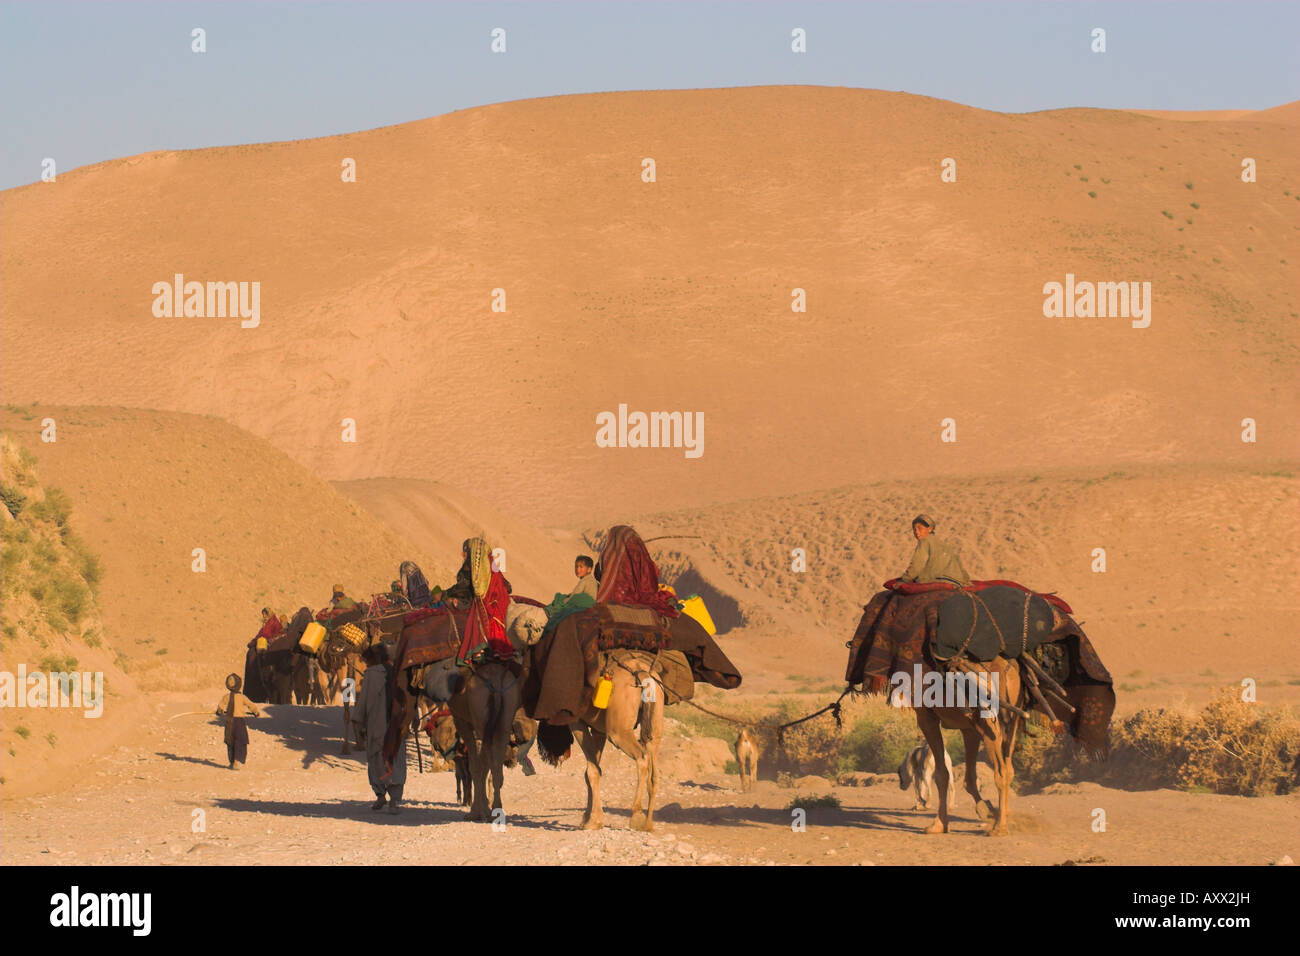 Kuchie nomad camel train, between Chakhcharan and Jam, Afghanistan, Asia Stock Photo